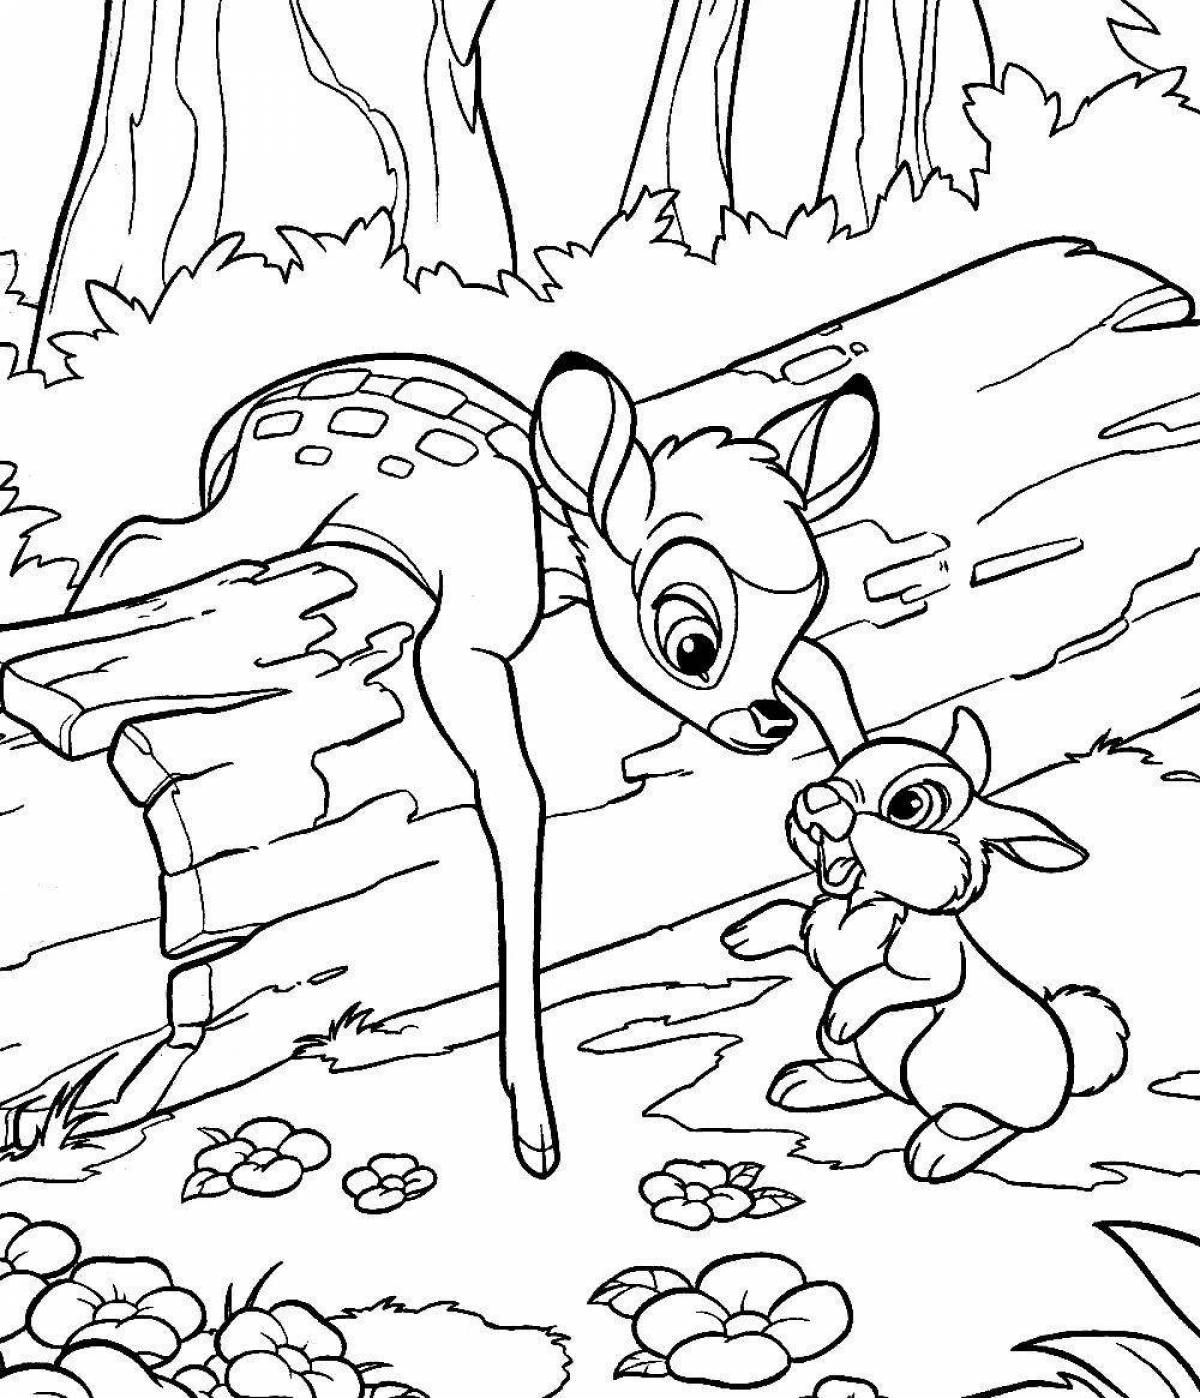 Coloring book joyful bambi for children 3-4 years old